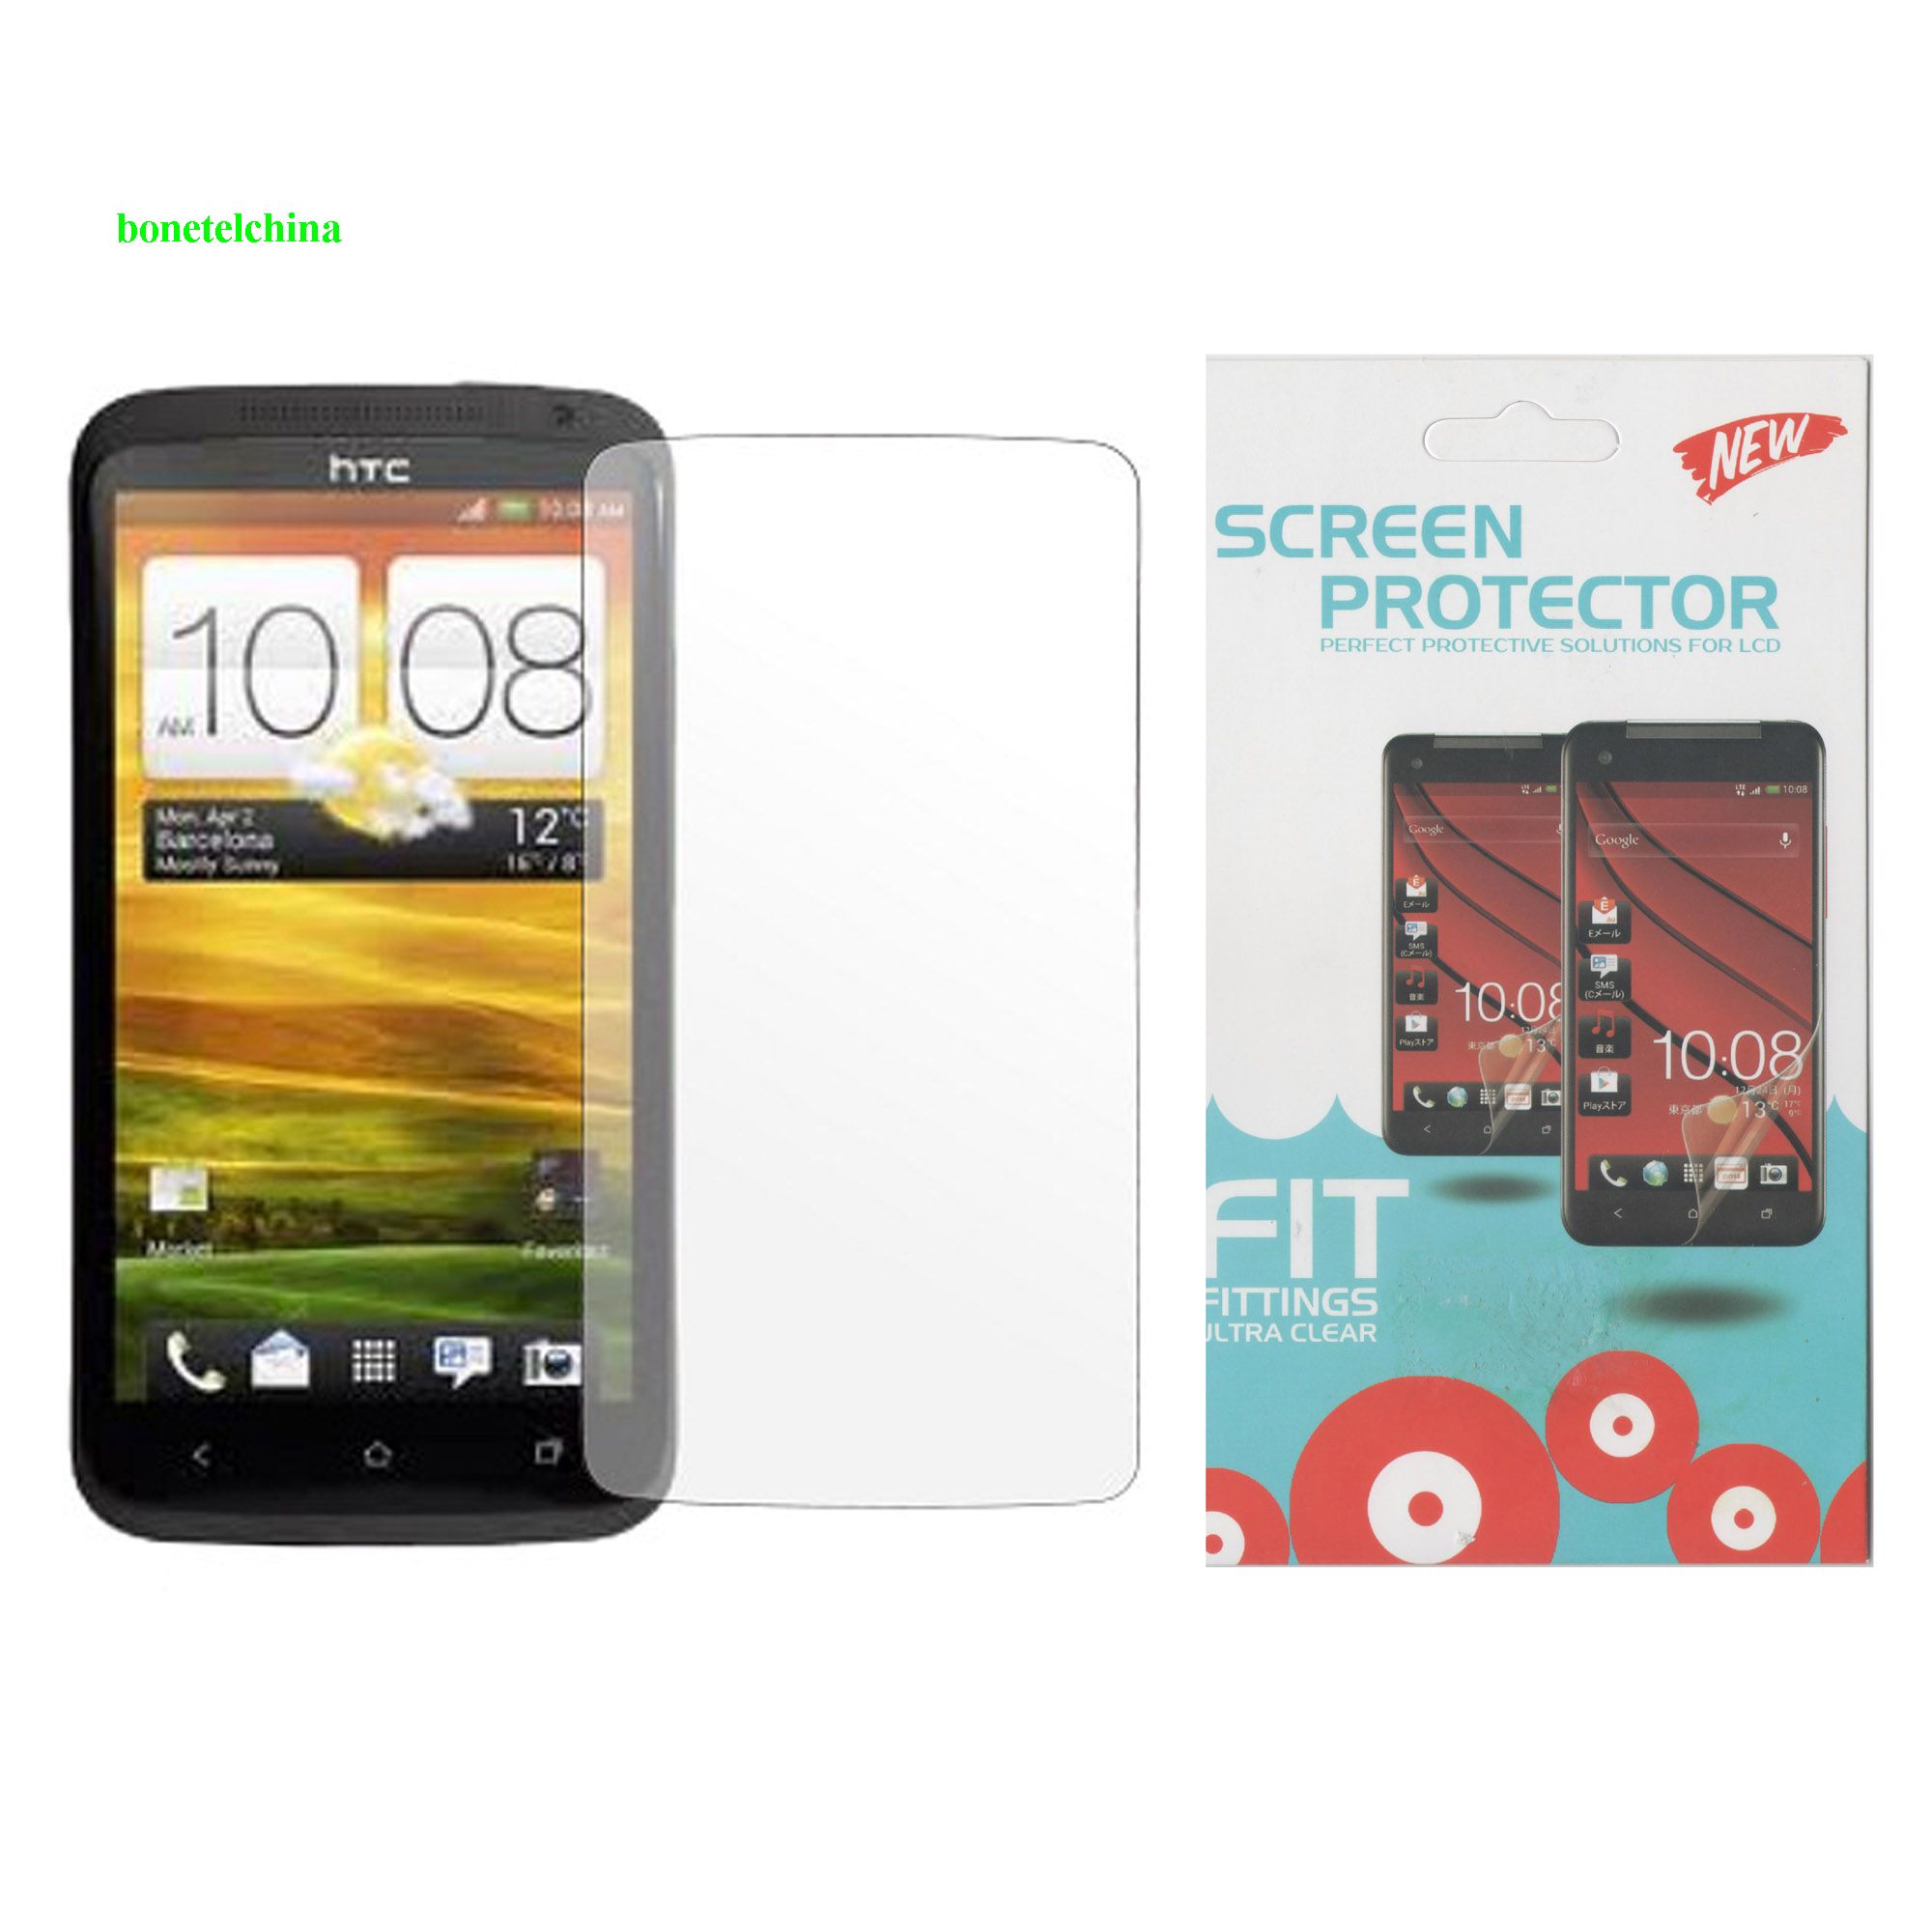 Screen proector for HTC One X+